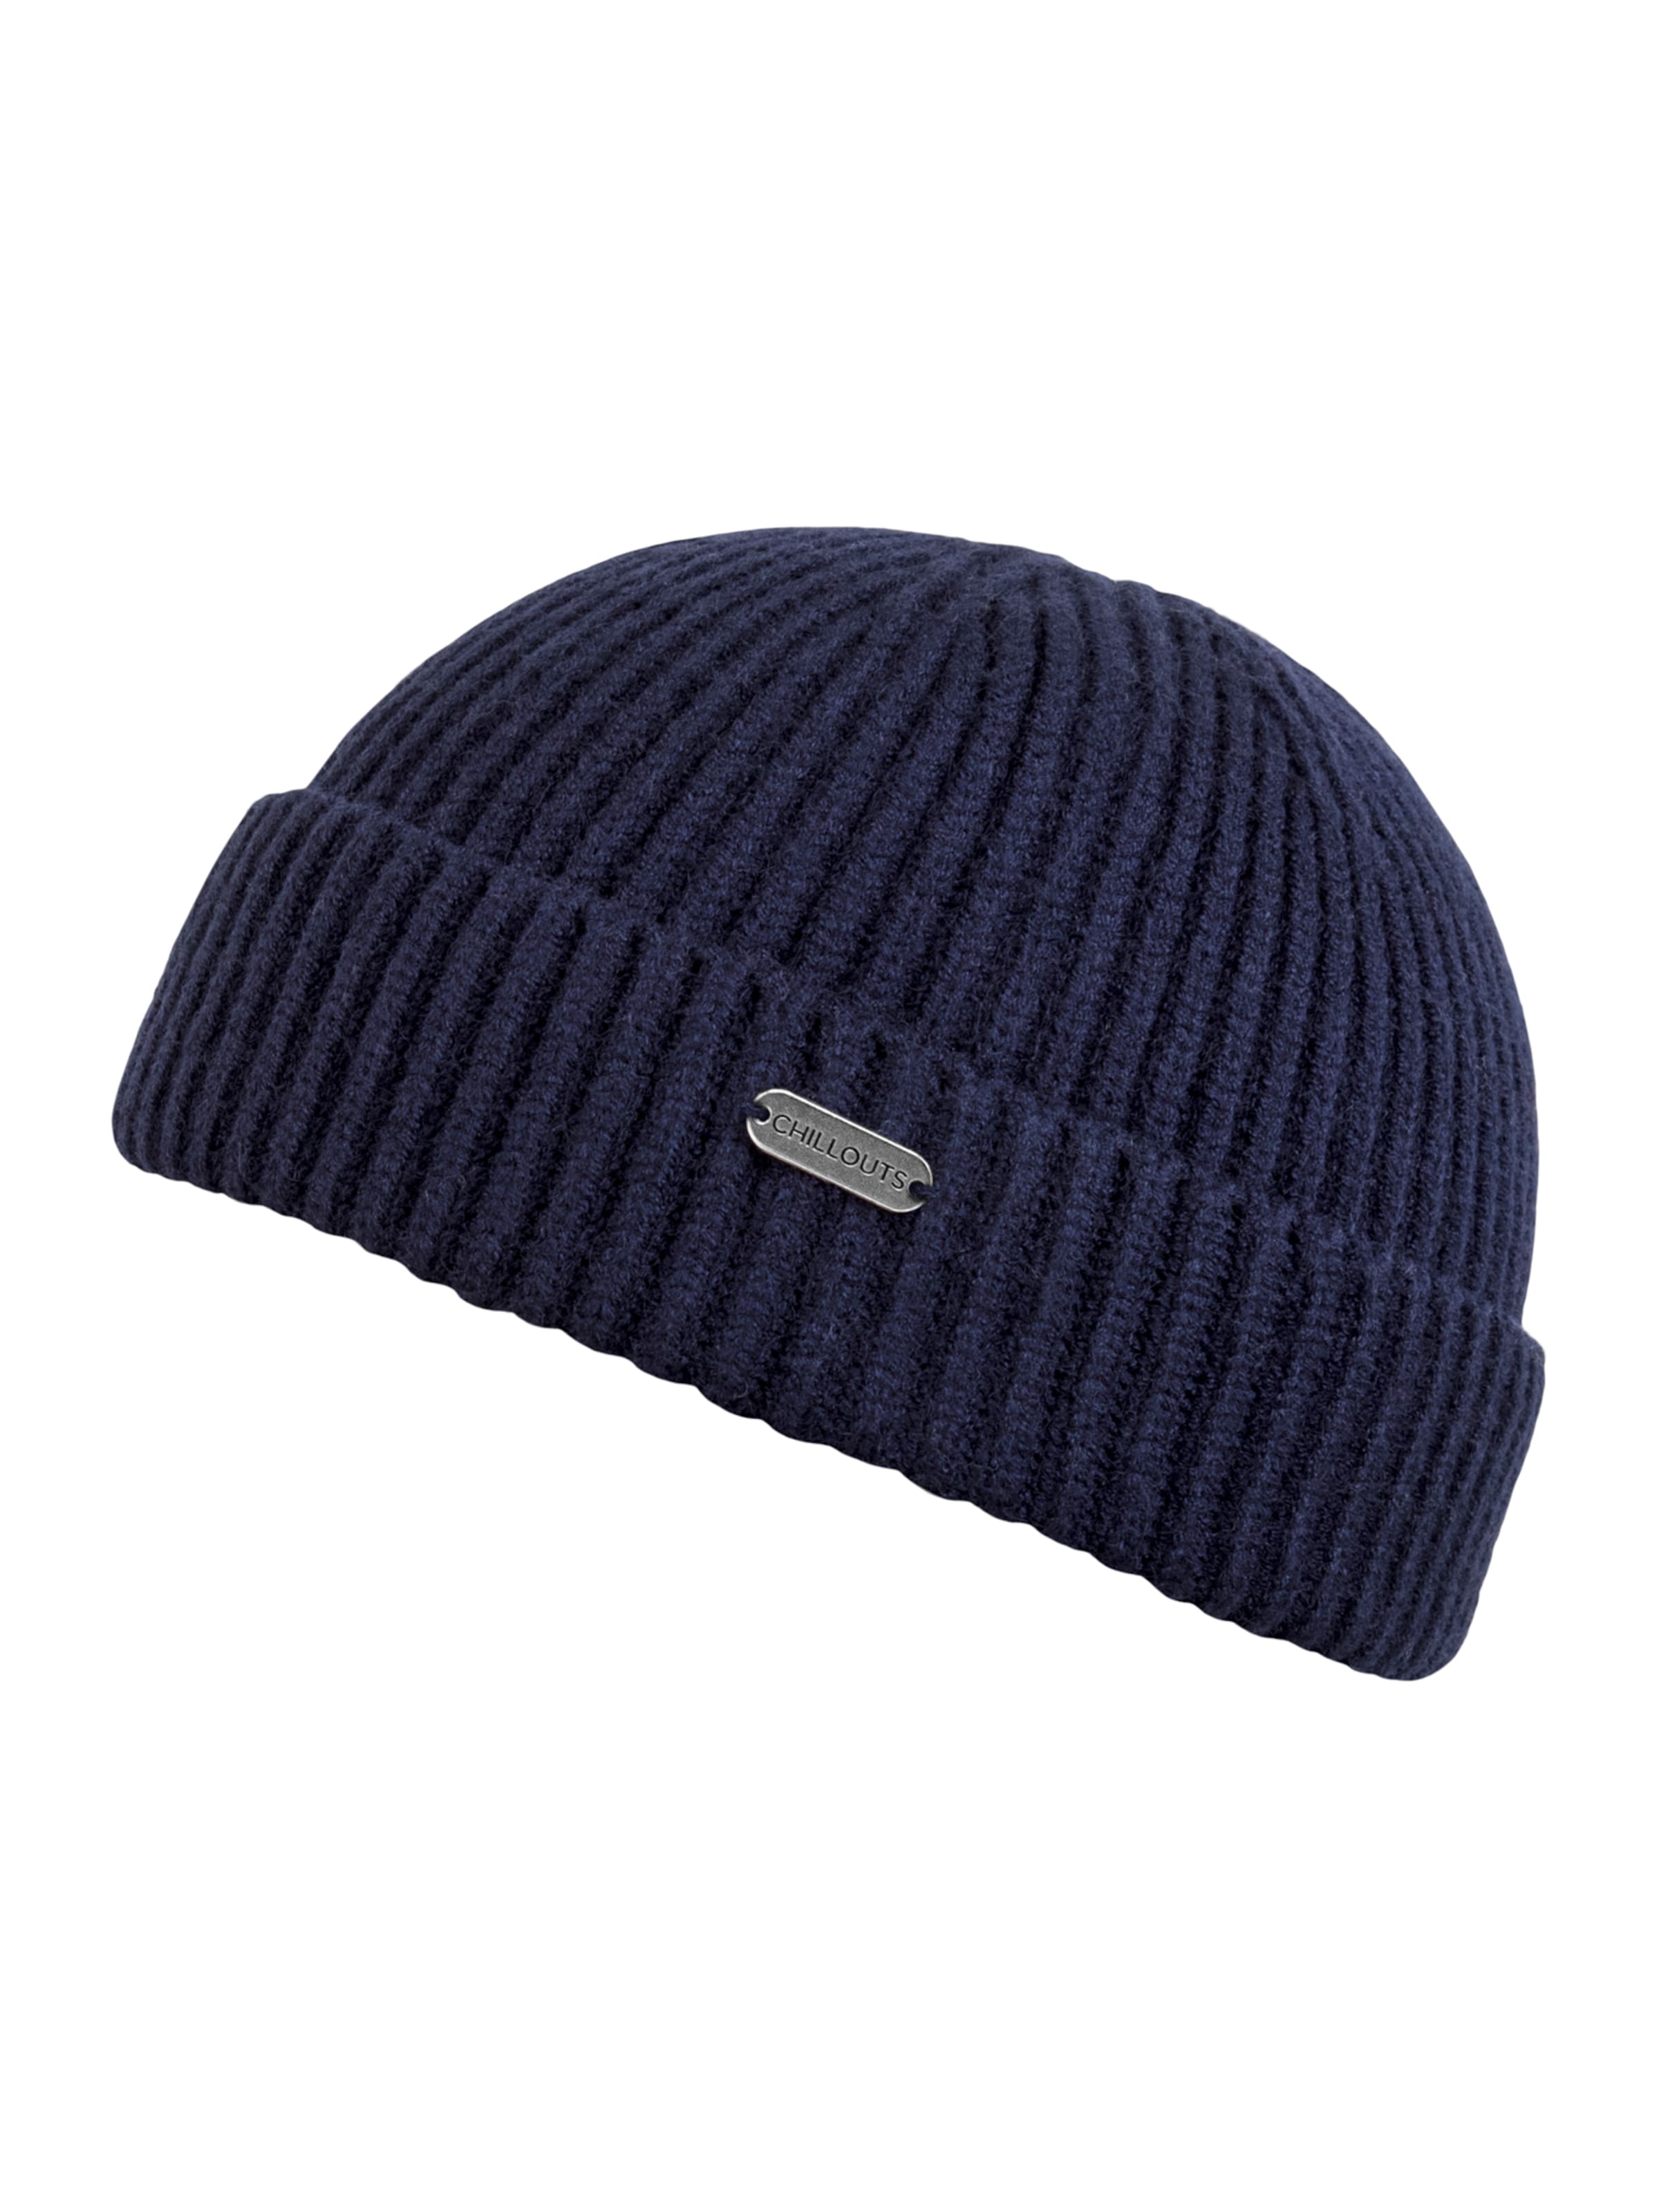 chillouts Mütze Ole in Navy 